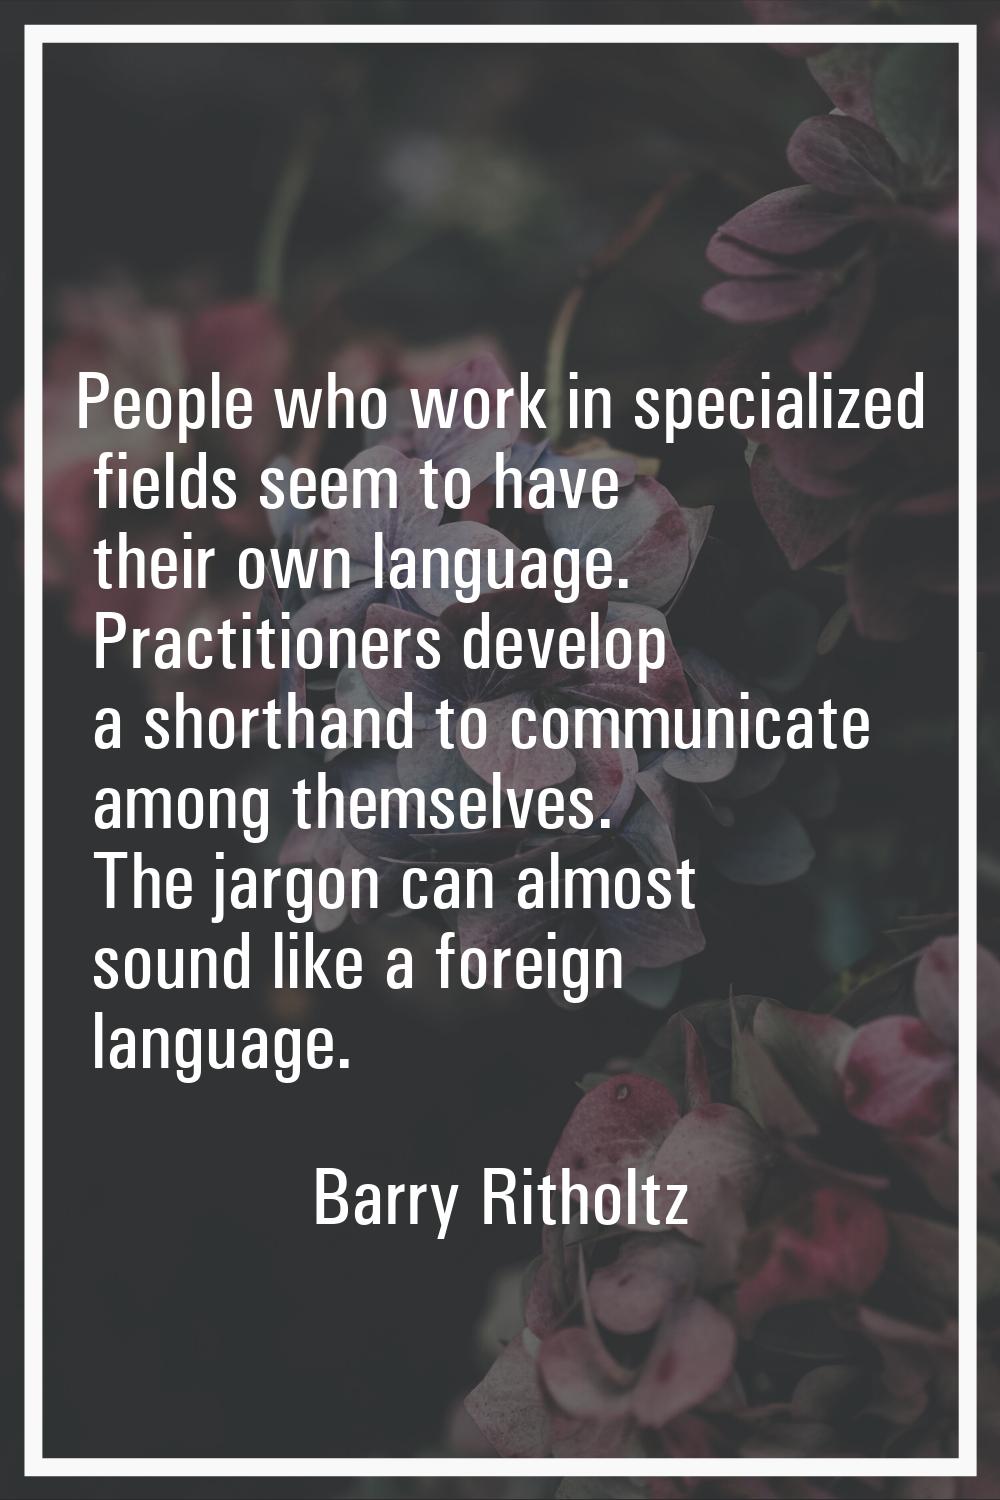 People who work in specialized fields seem to have their own language. Practitioners develop a shor